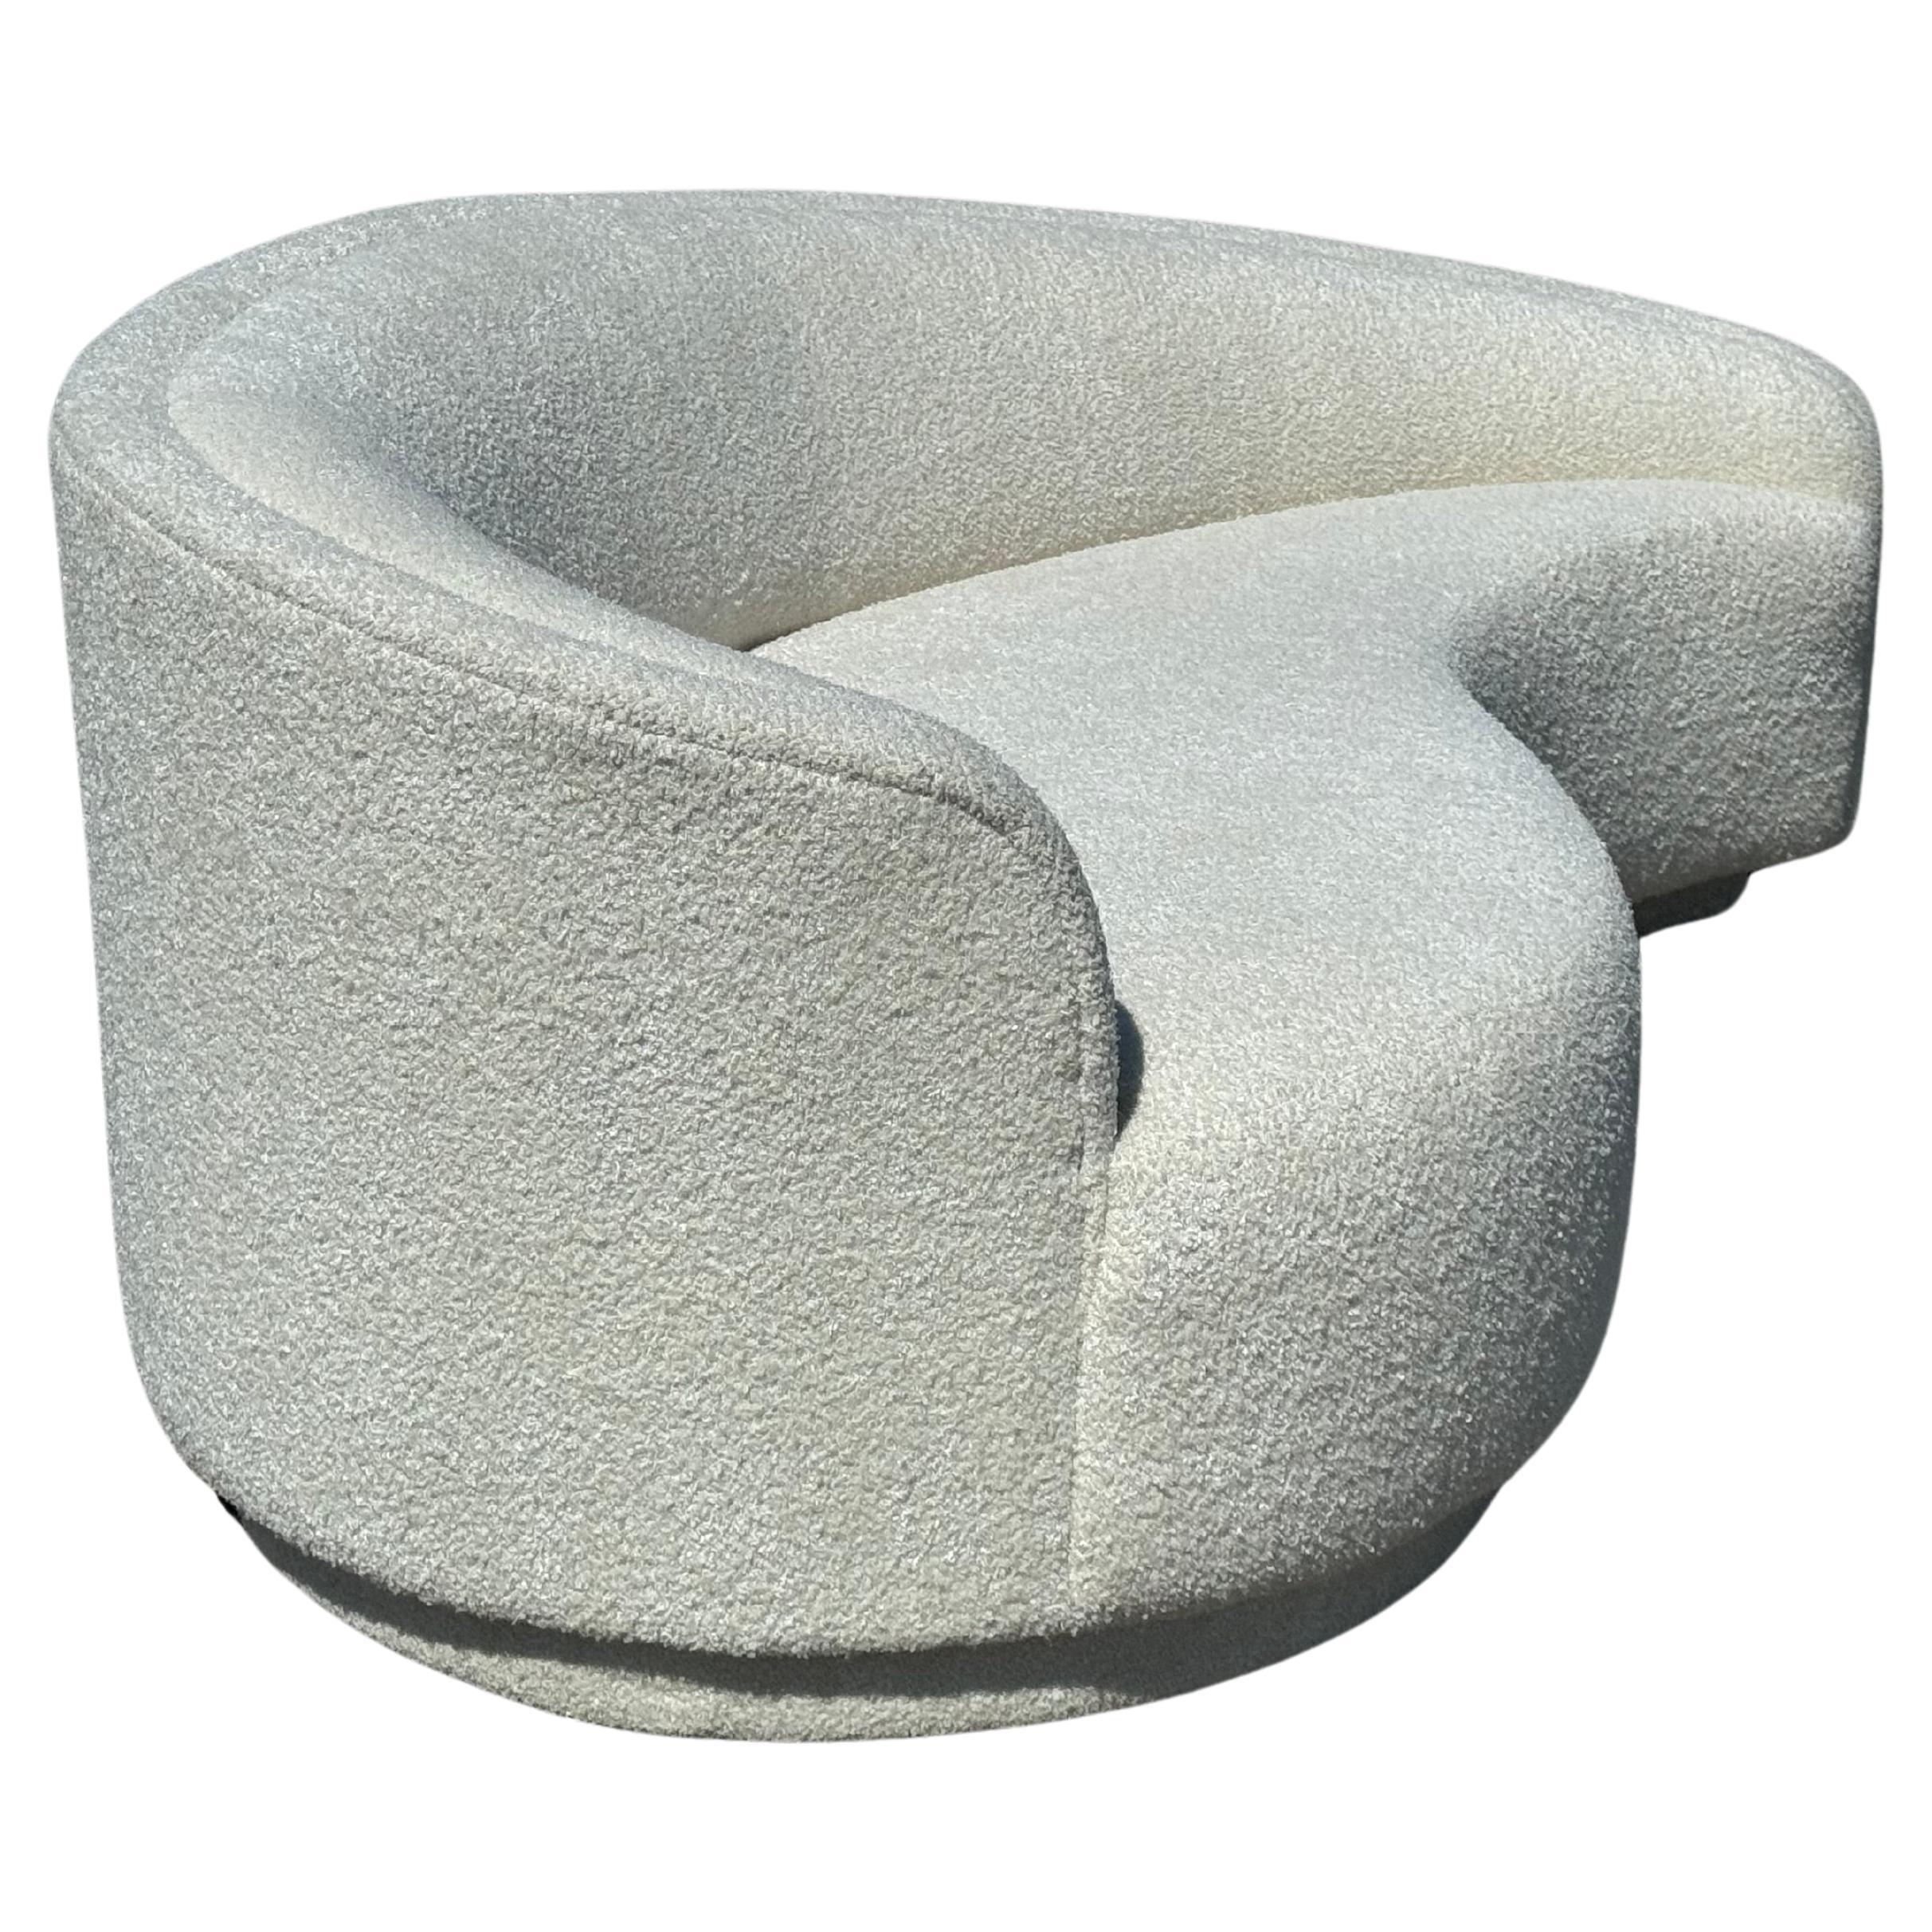 Upholstery 1980s Glamours Curved Sofa - Chaise by Vladimir Kagan for Weiman in White Bouclé For Sale